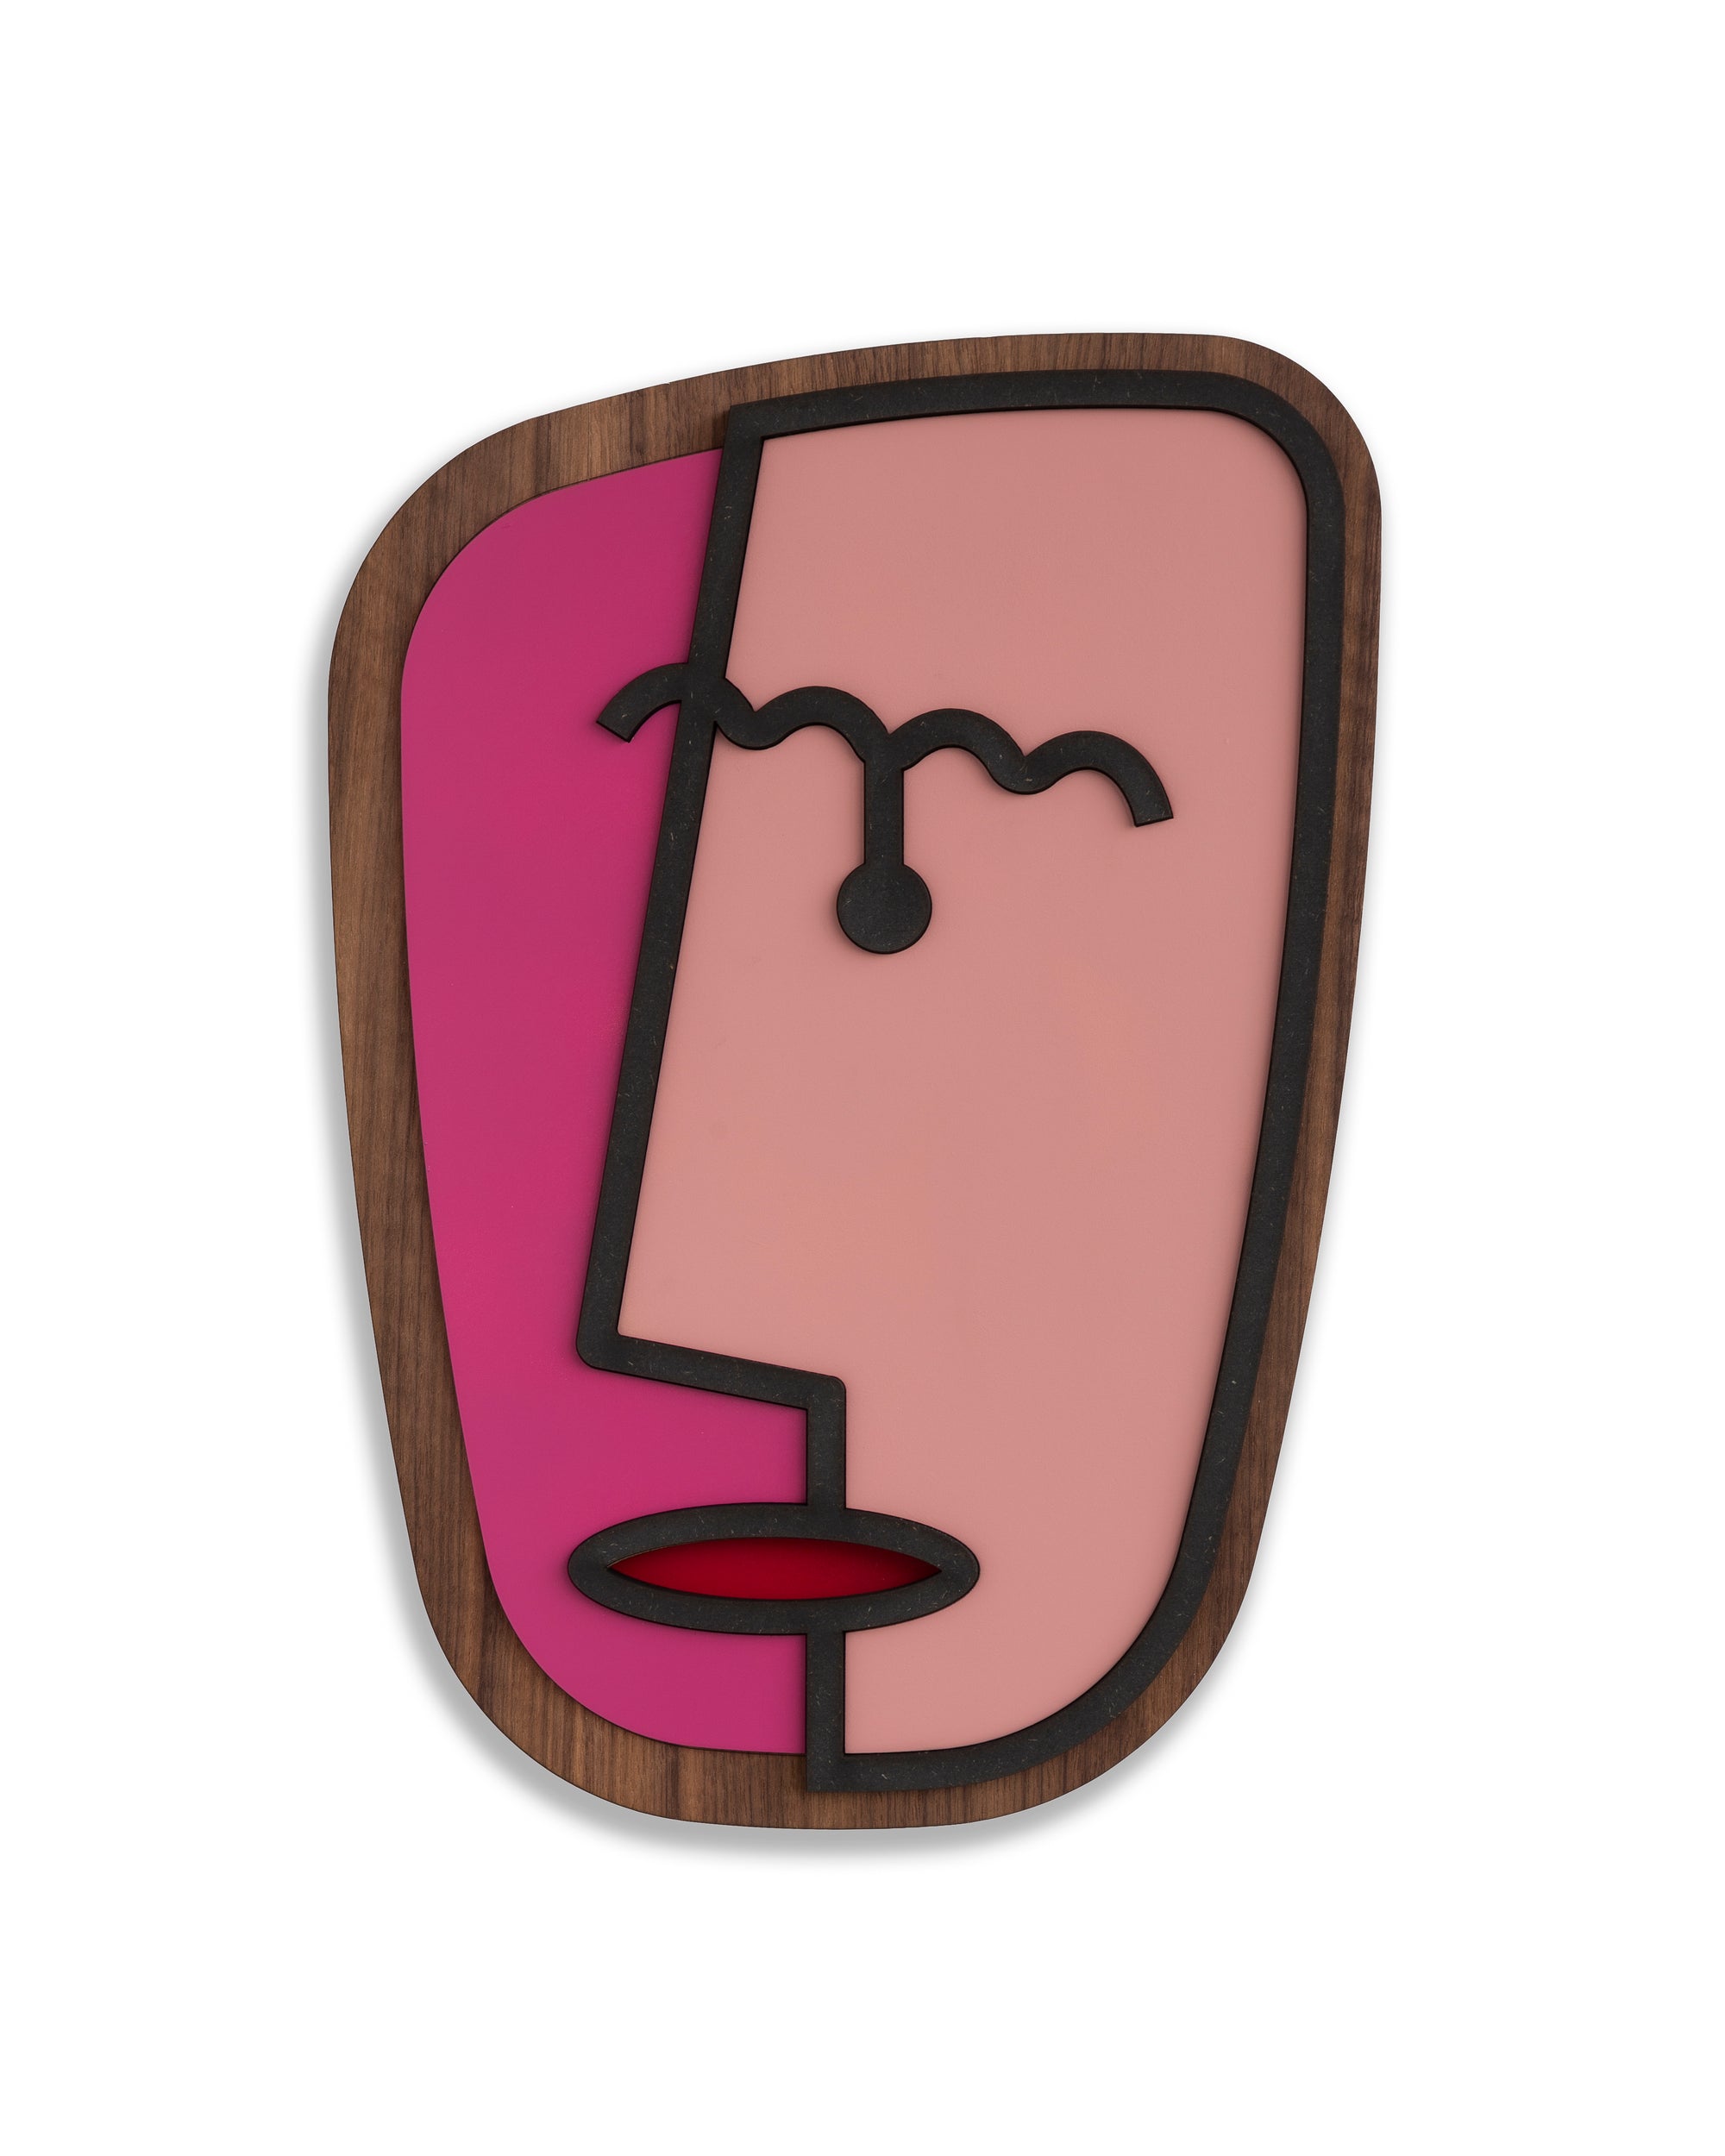 Reflect your face & personality with Picasso line drawings in wall decor - Pink Colors